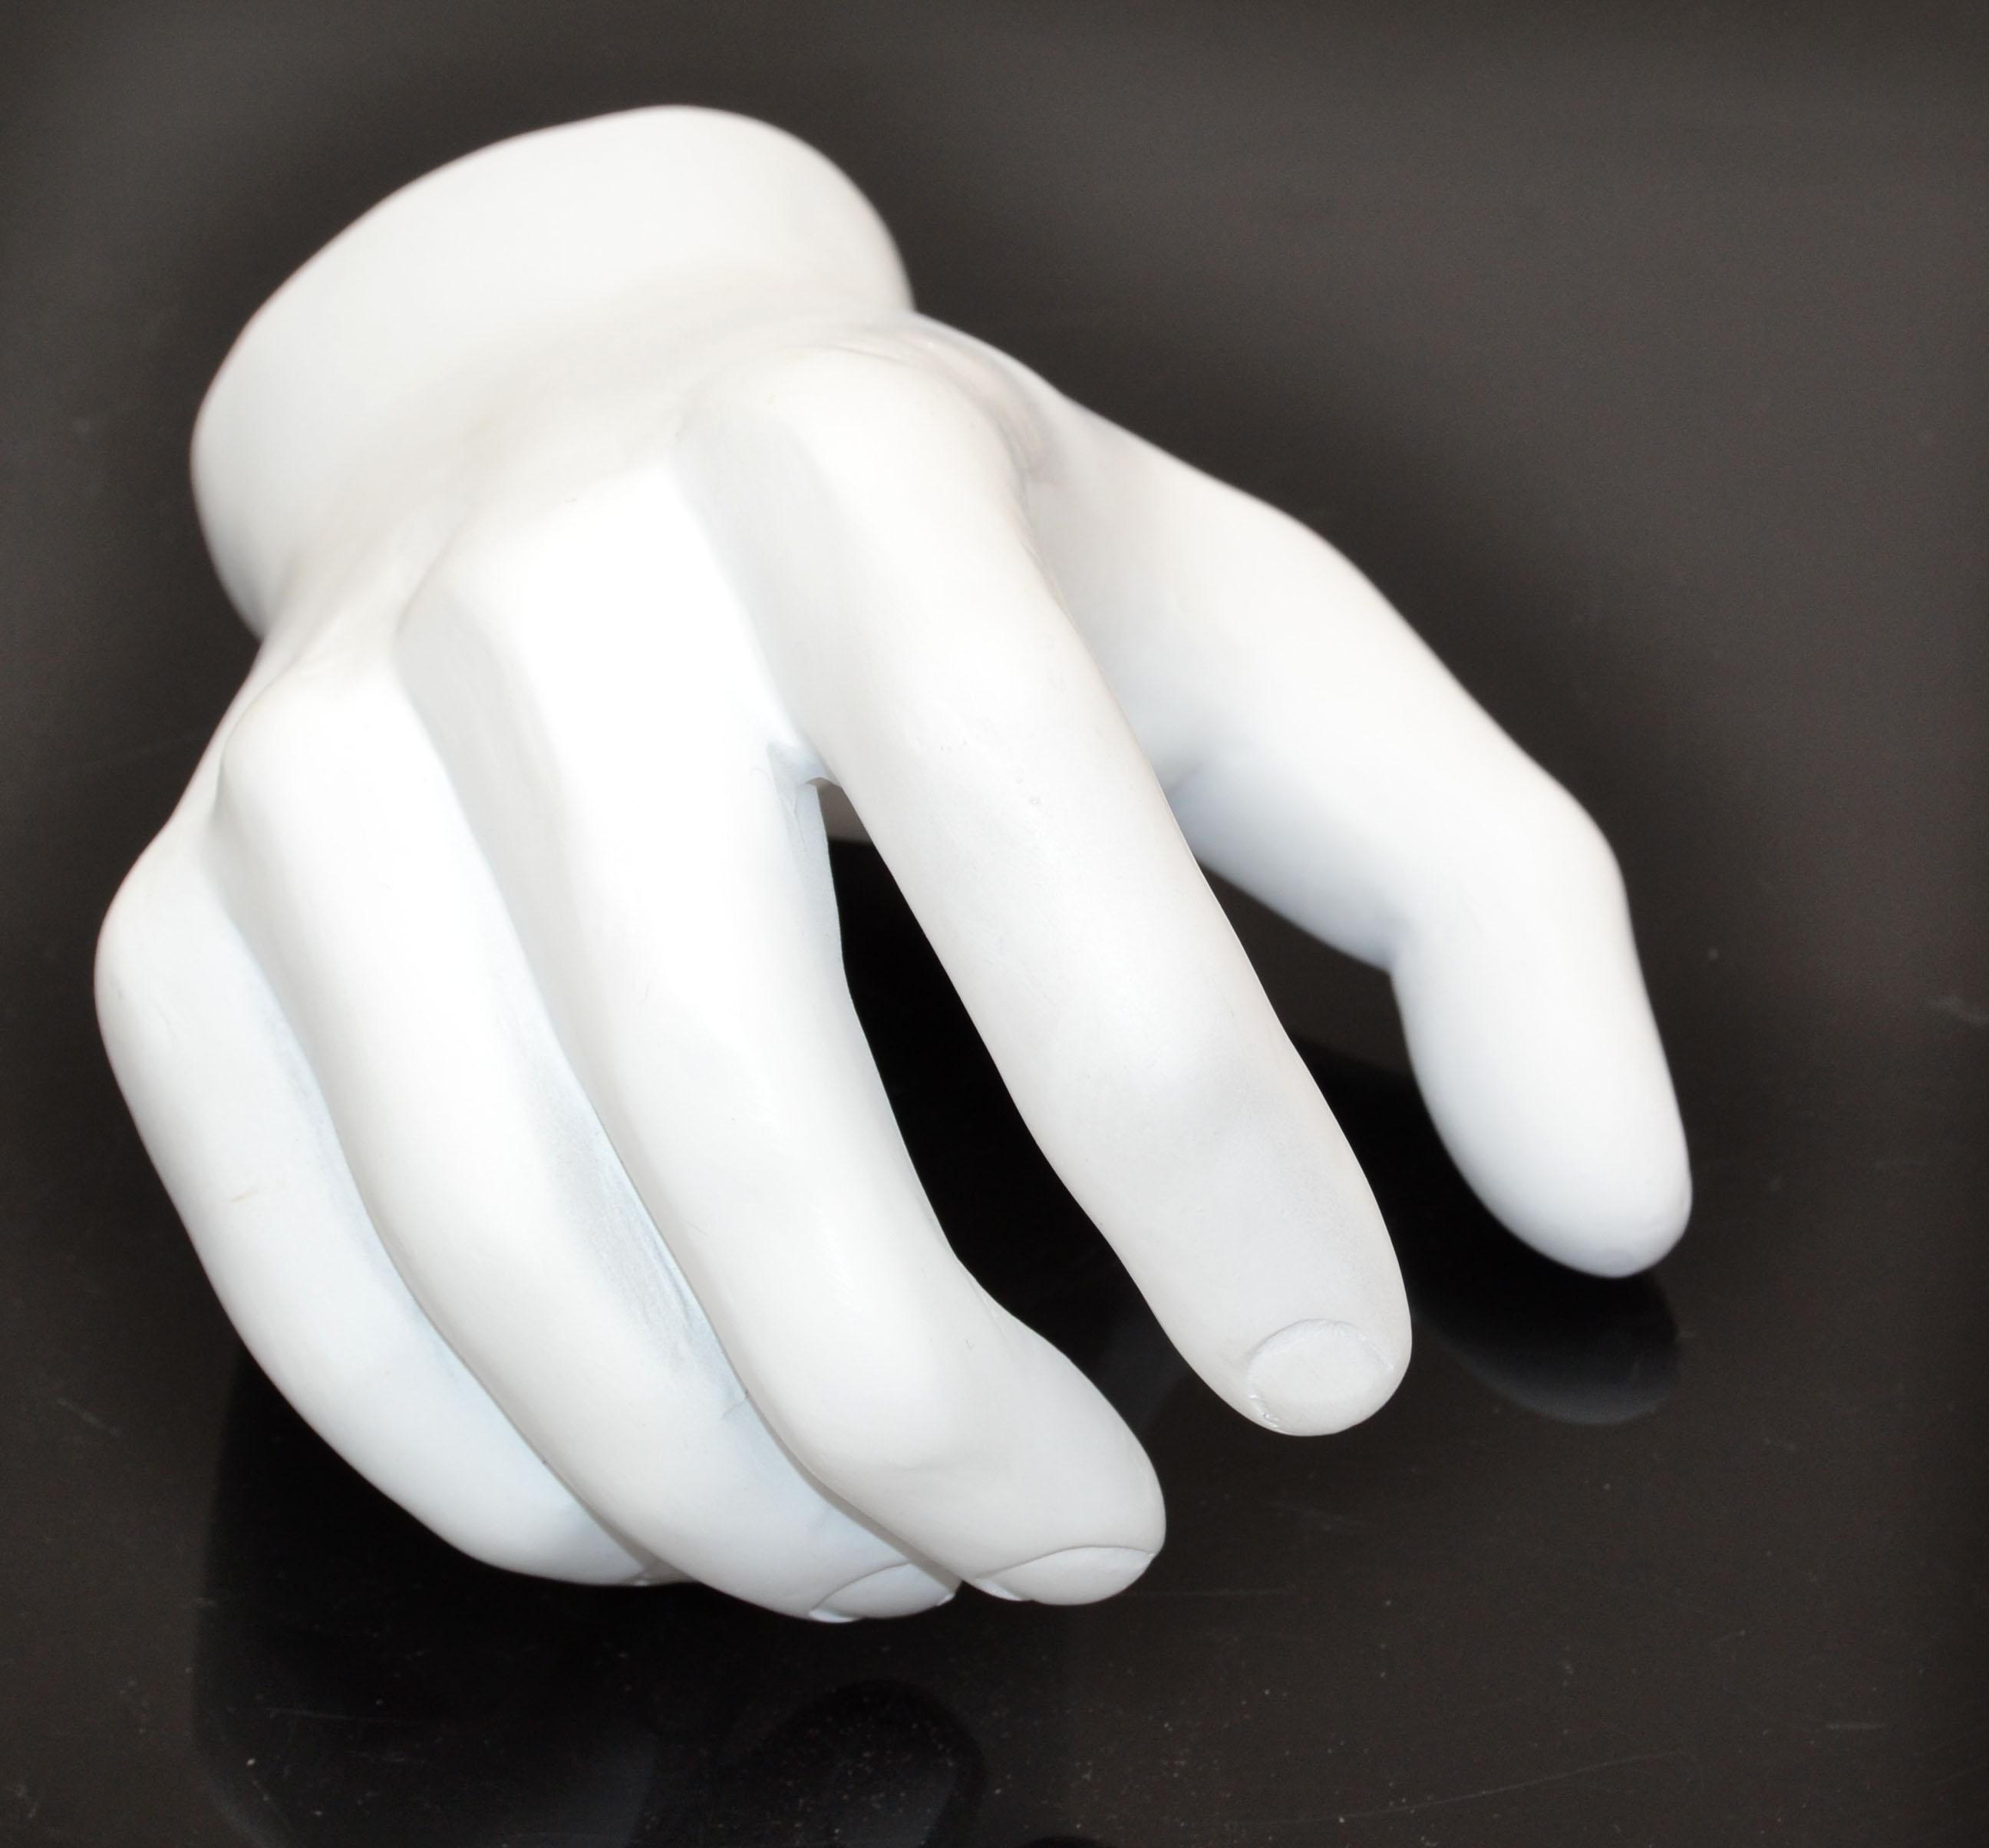 White Resin Wall Mounted Figurative Hand Sculpture Mid-Century Modern Key Holder For Sale 2